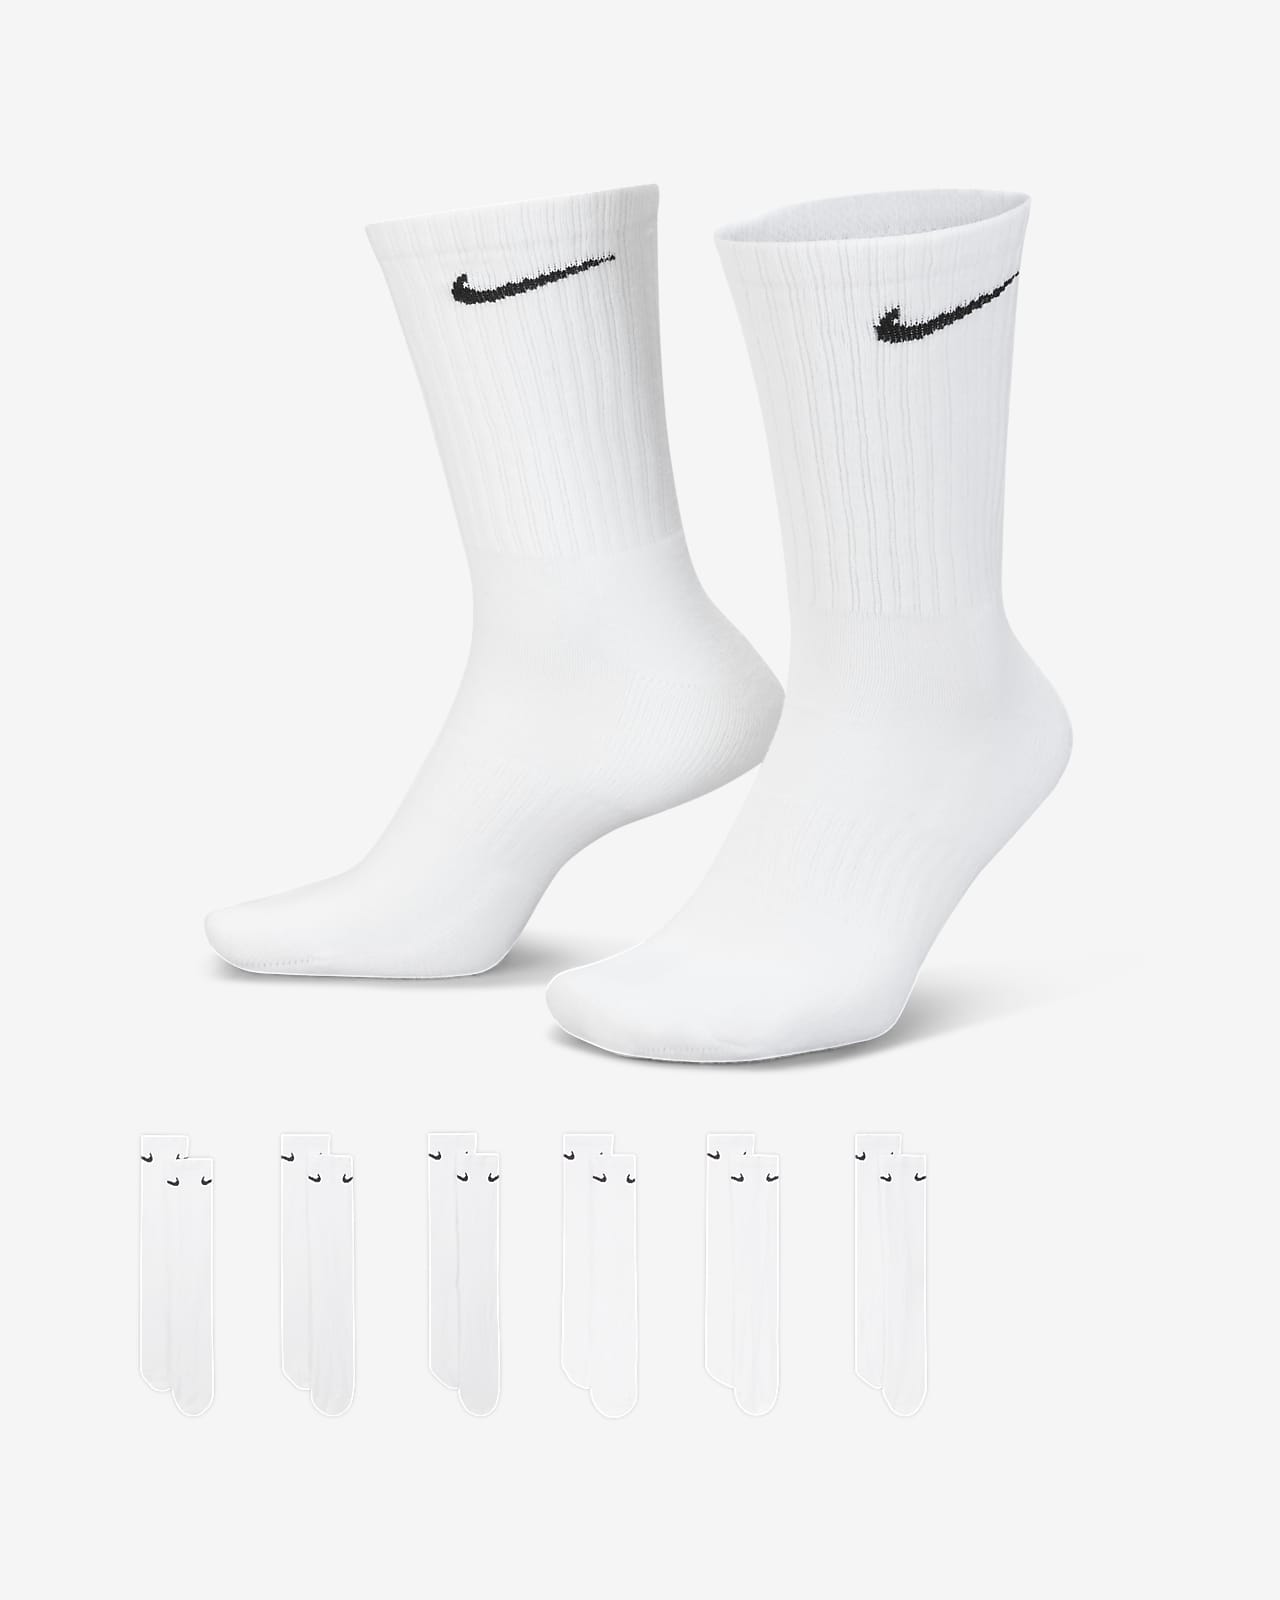 Chaussettes de training mi-mollet Nike Everyday Cushioned (6 paires)